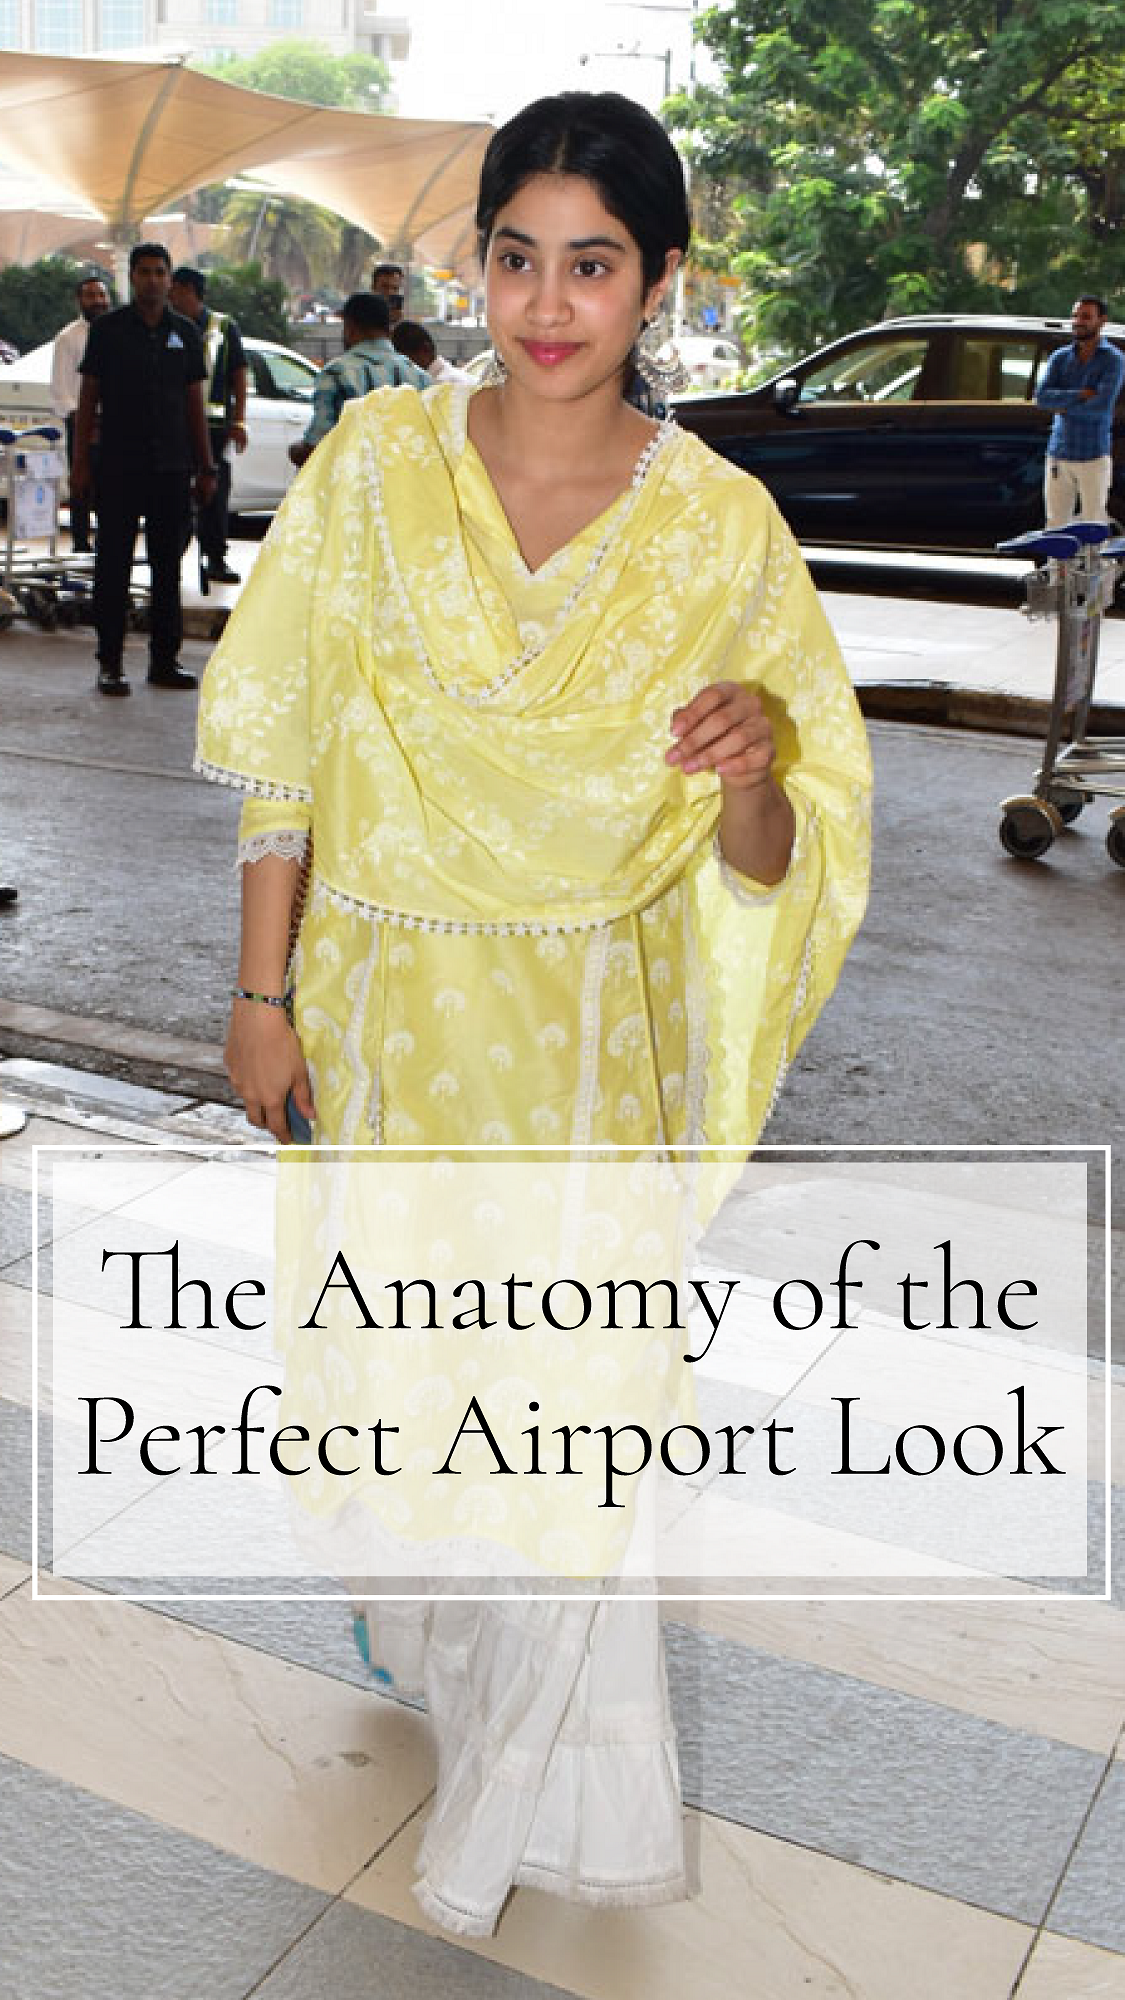 The Anatomy of the perfect airport look